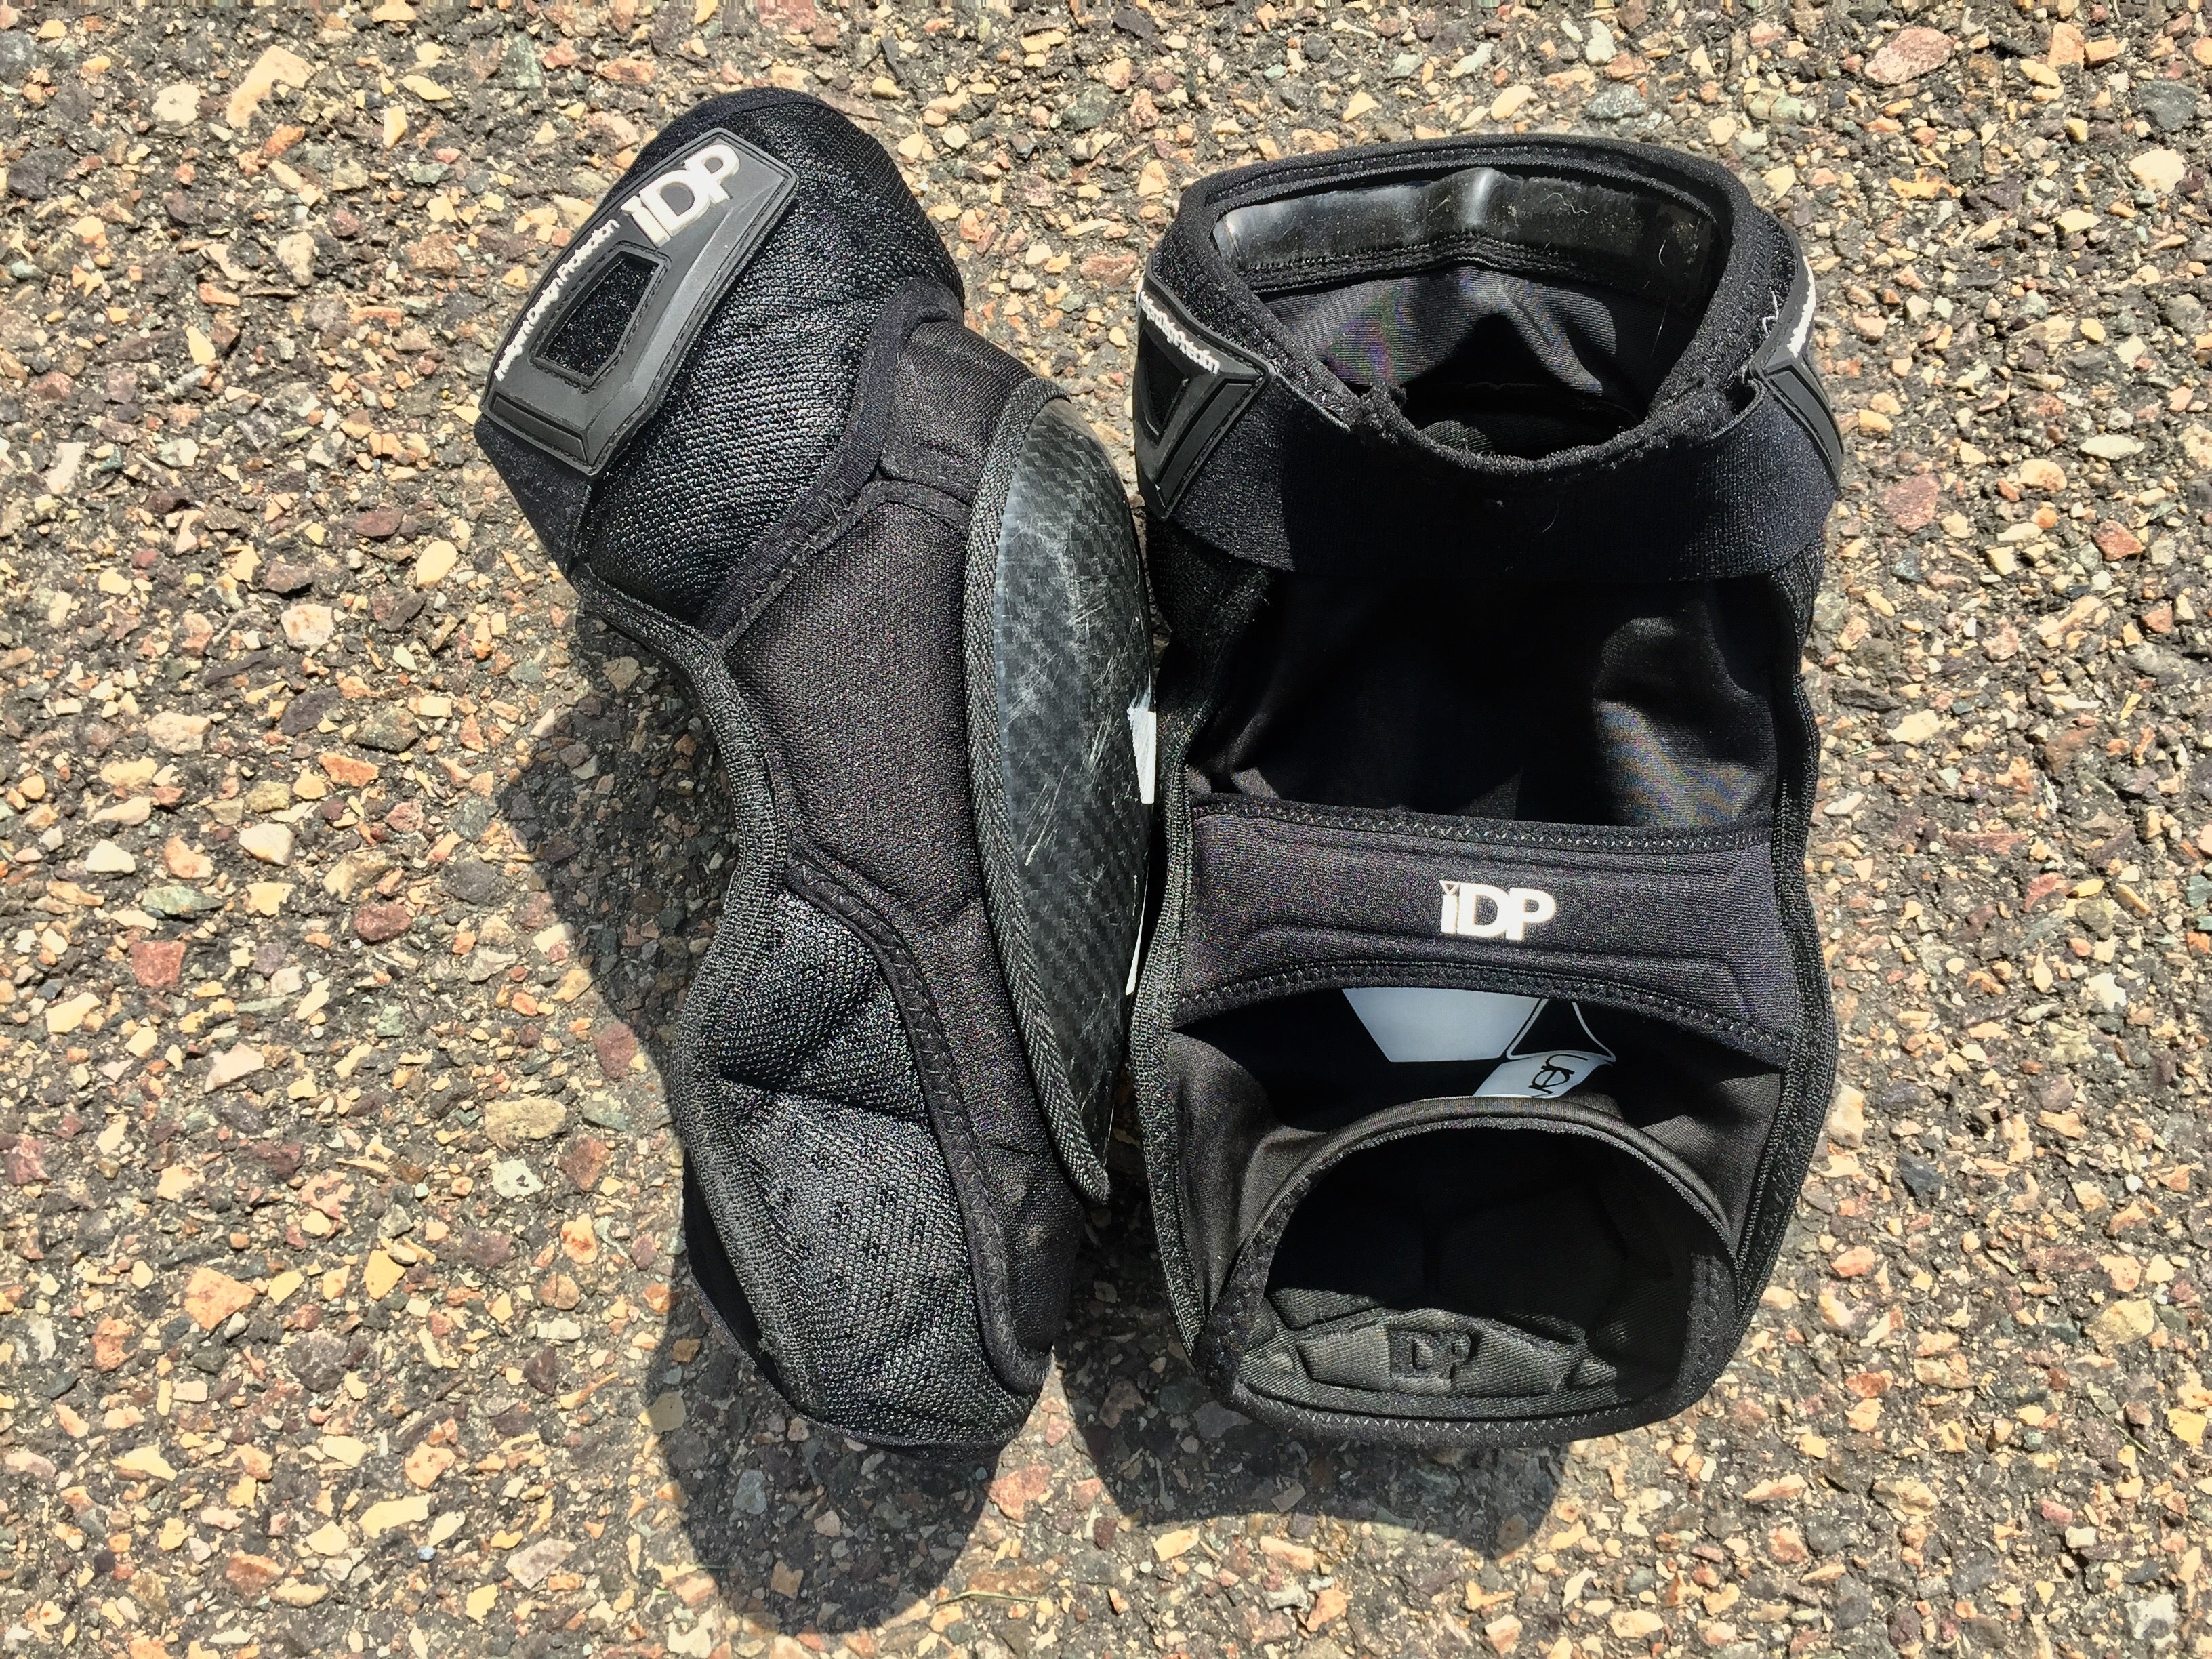 7 Protection Control Knee Pads Review | Worldwide Cyclery